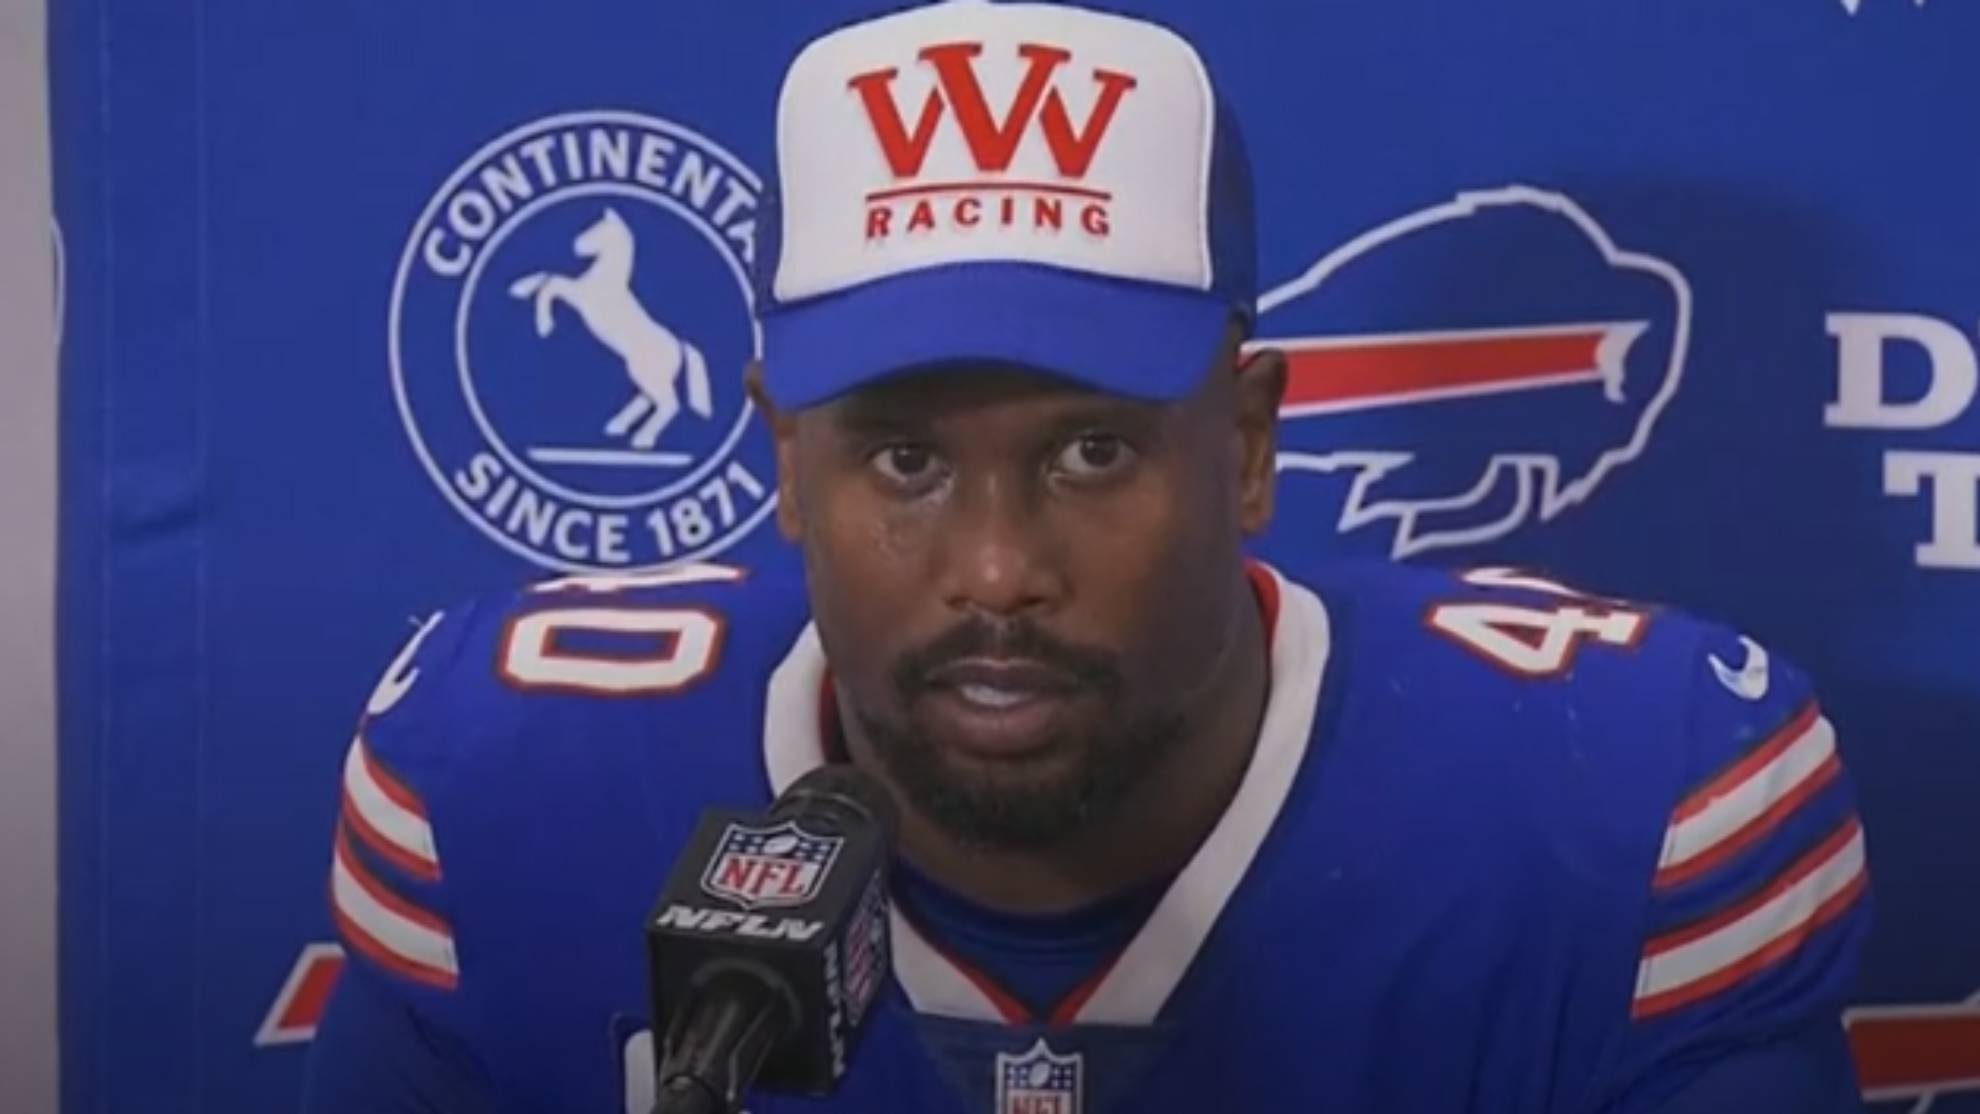 Von Miller on win over Rams: "We're going to make the plane do backflips"